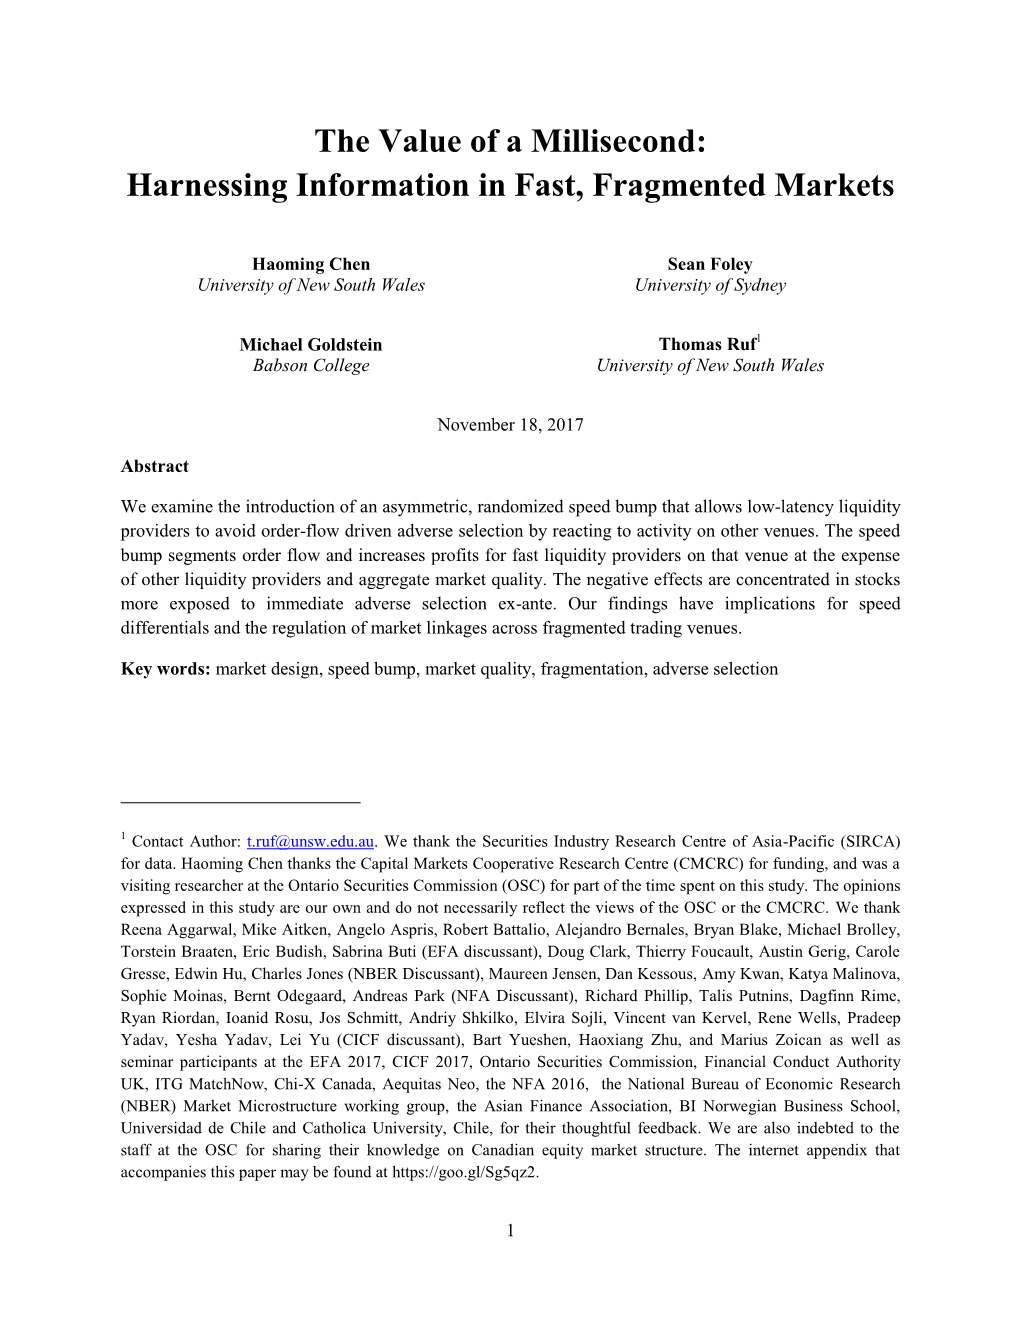 The Value of a Millisecond: Harnessing Information in Fast, Fragmented Markets